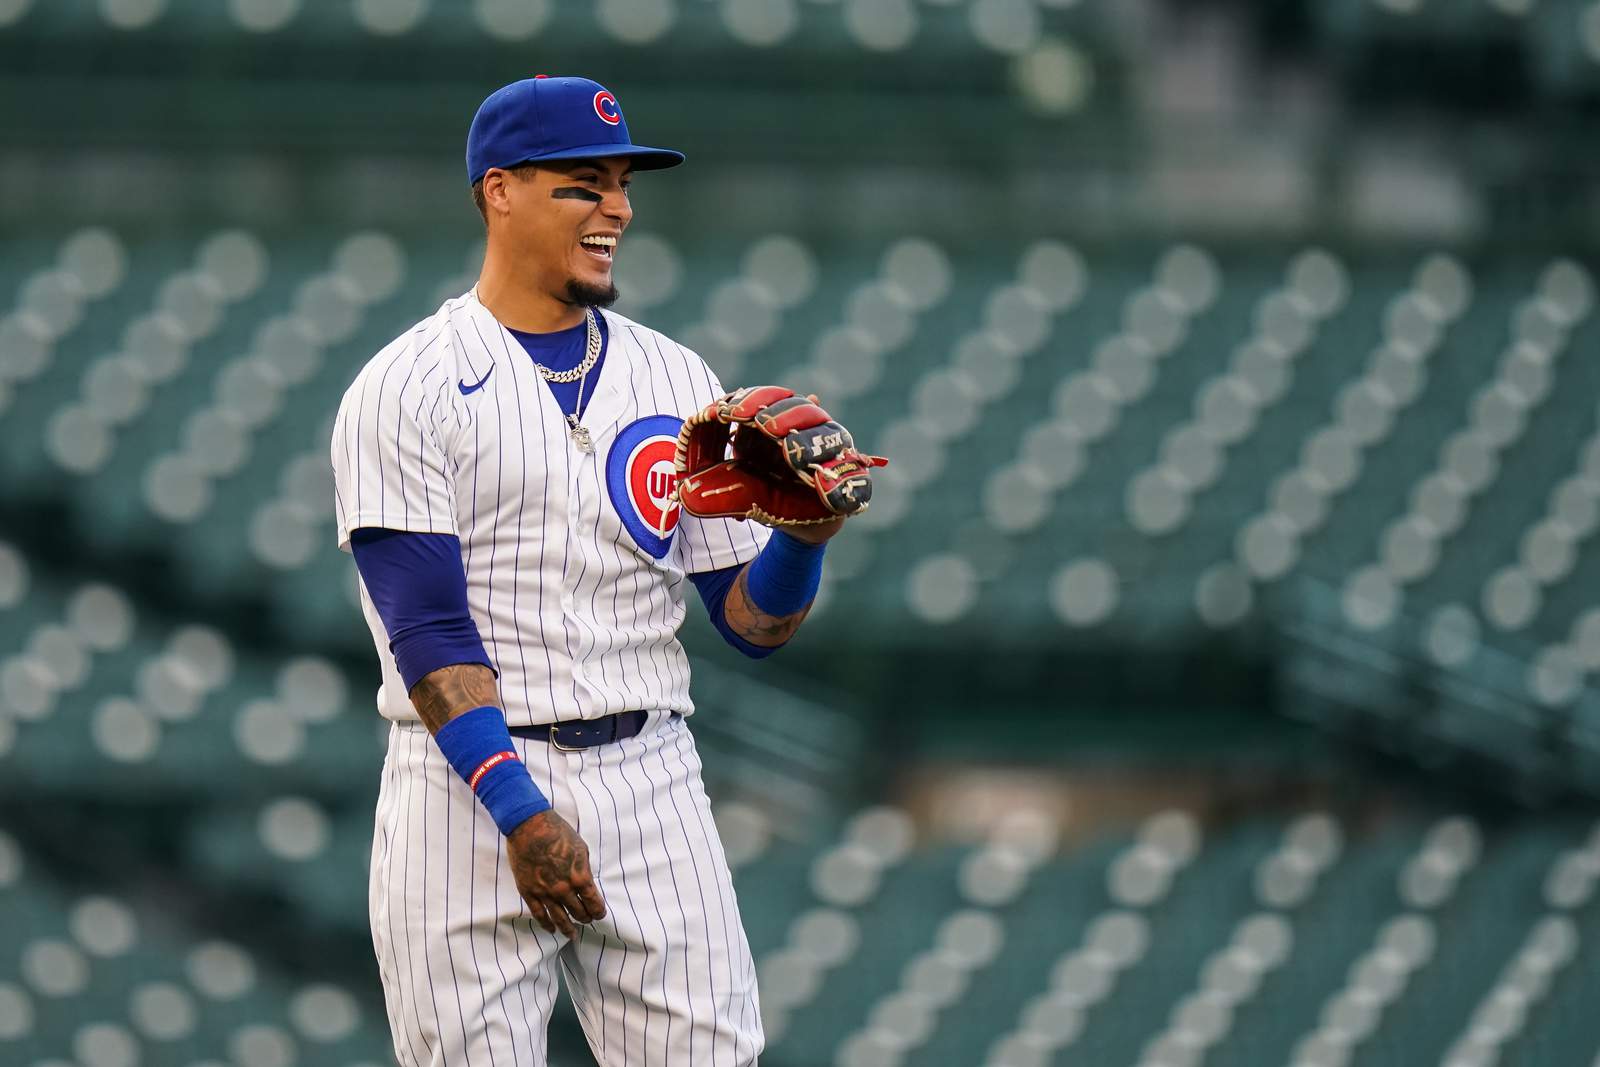 Cubs SS Javy Baez tosses bat past mound on strikeout, sails throw over first base into stands